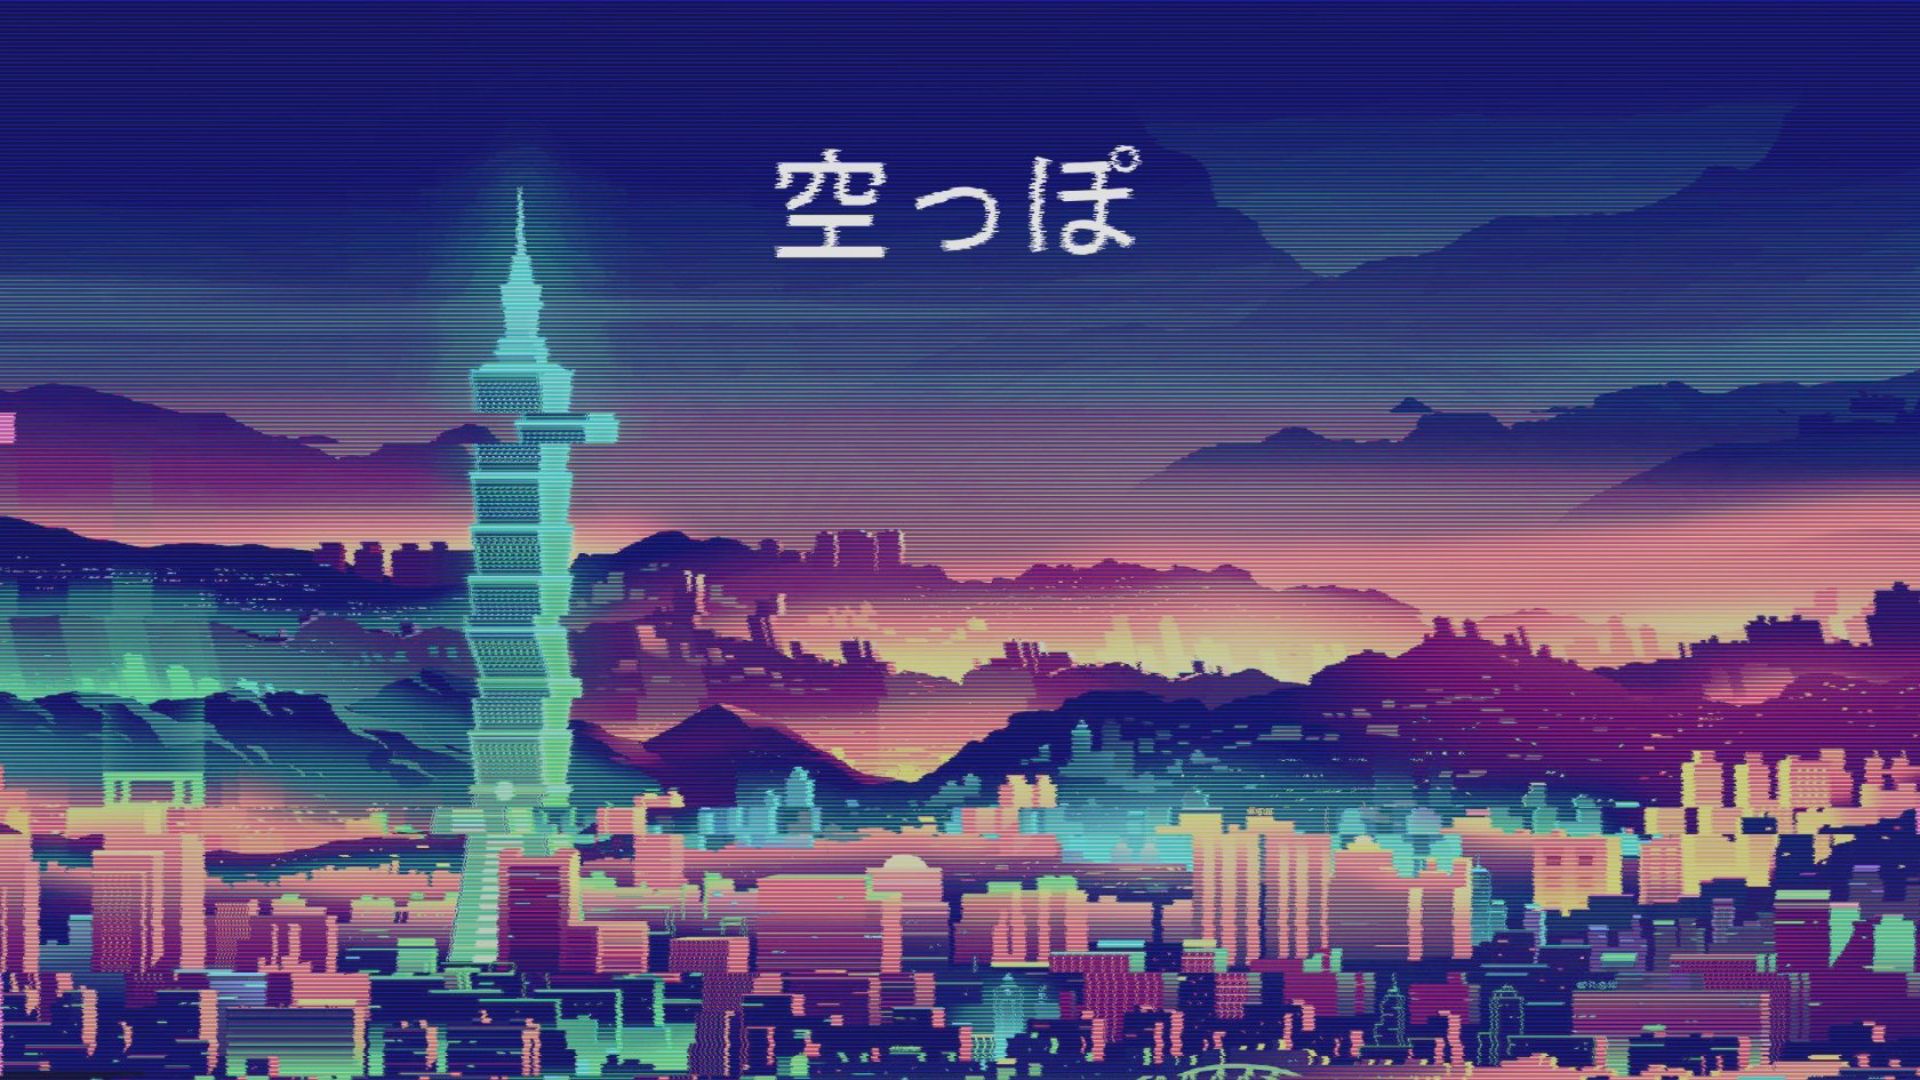 Aesthetic Anime Computer Wallpapers